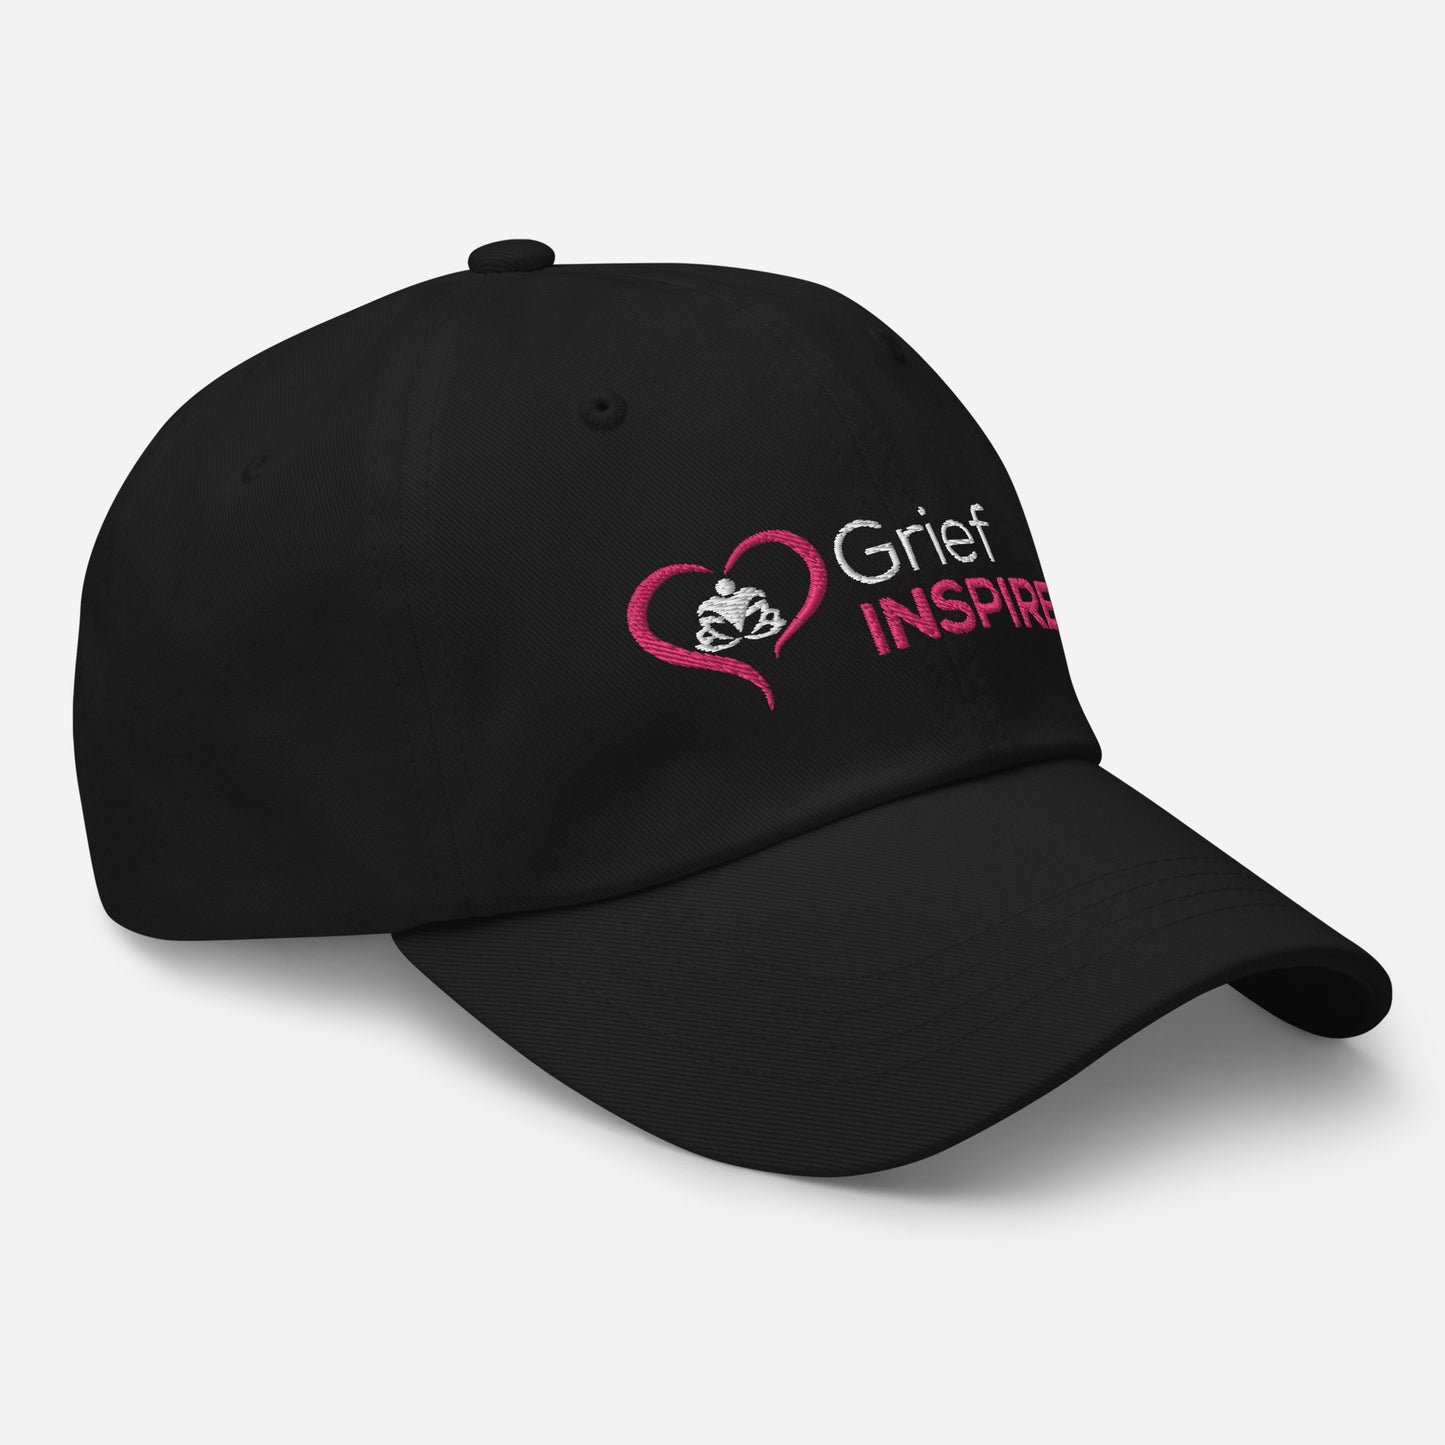 Grief Inspired hat